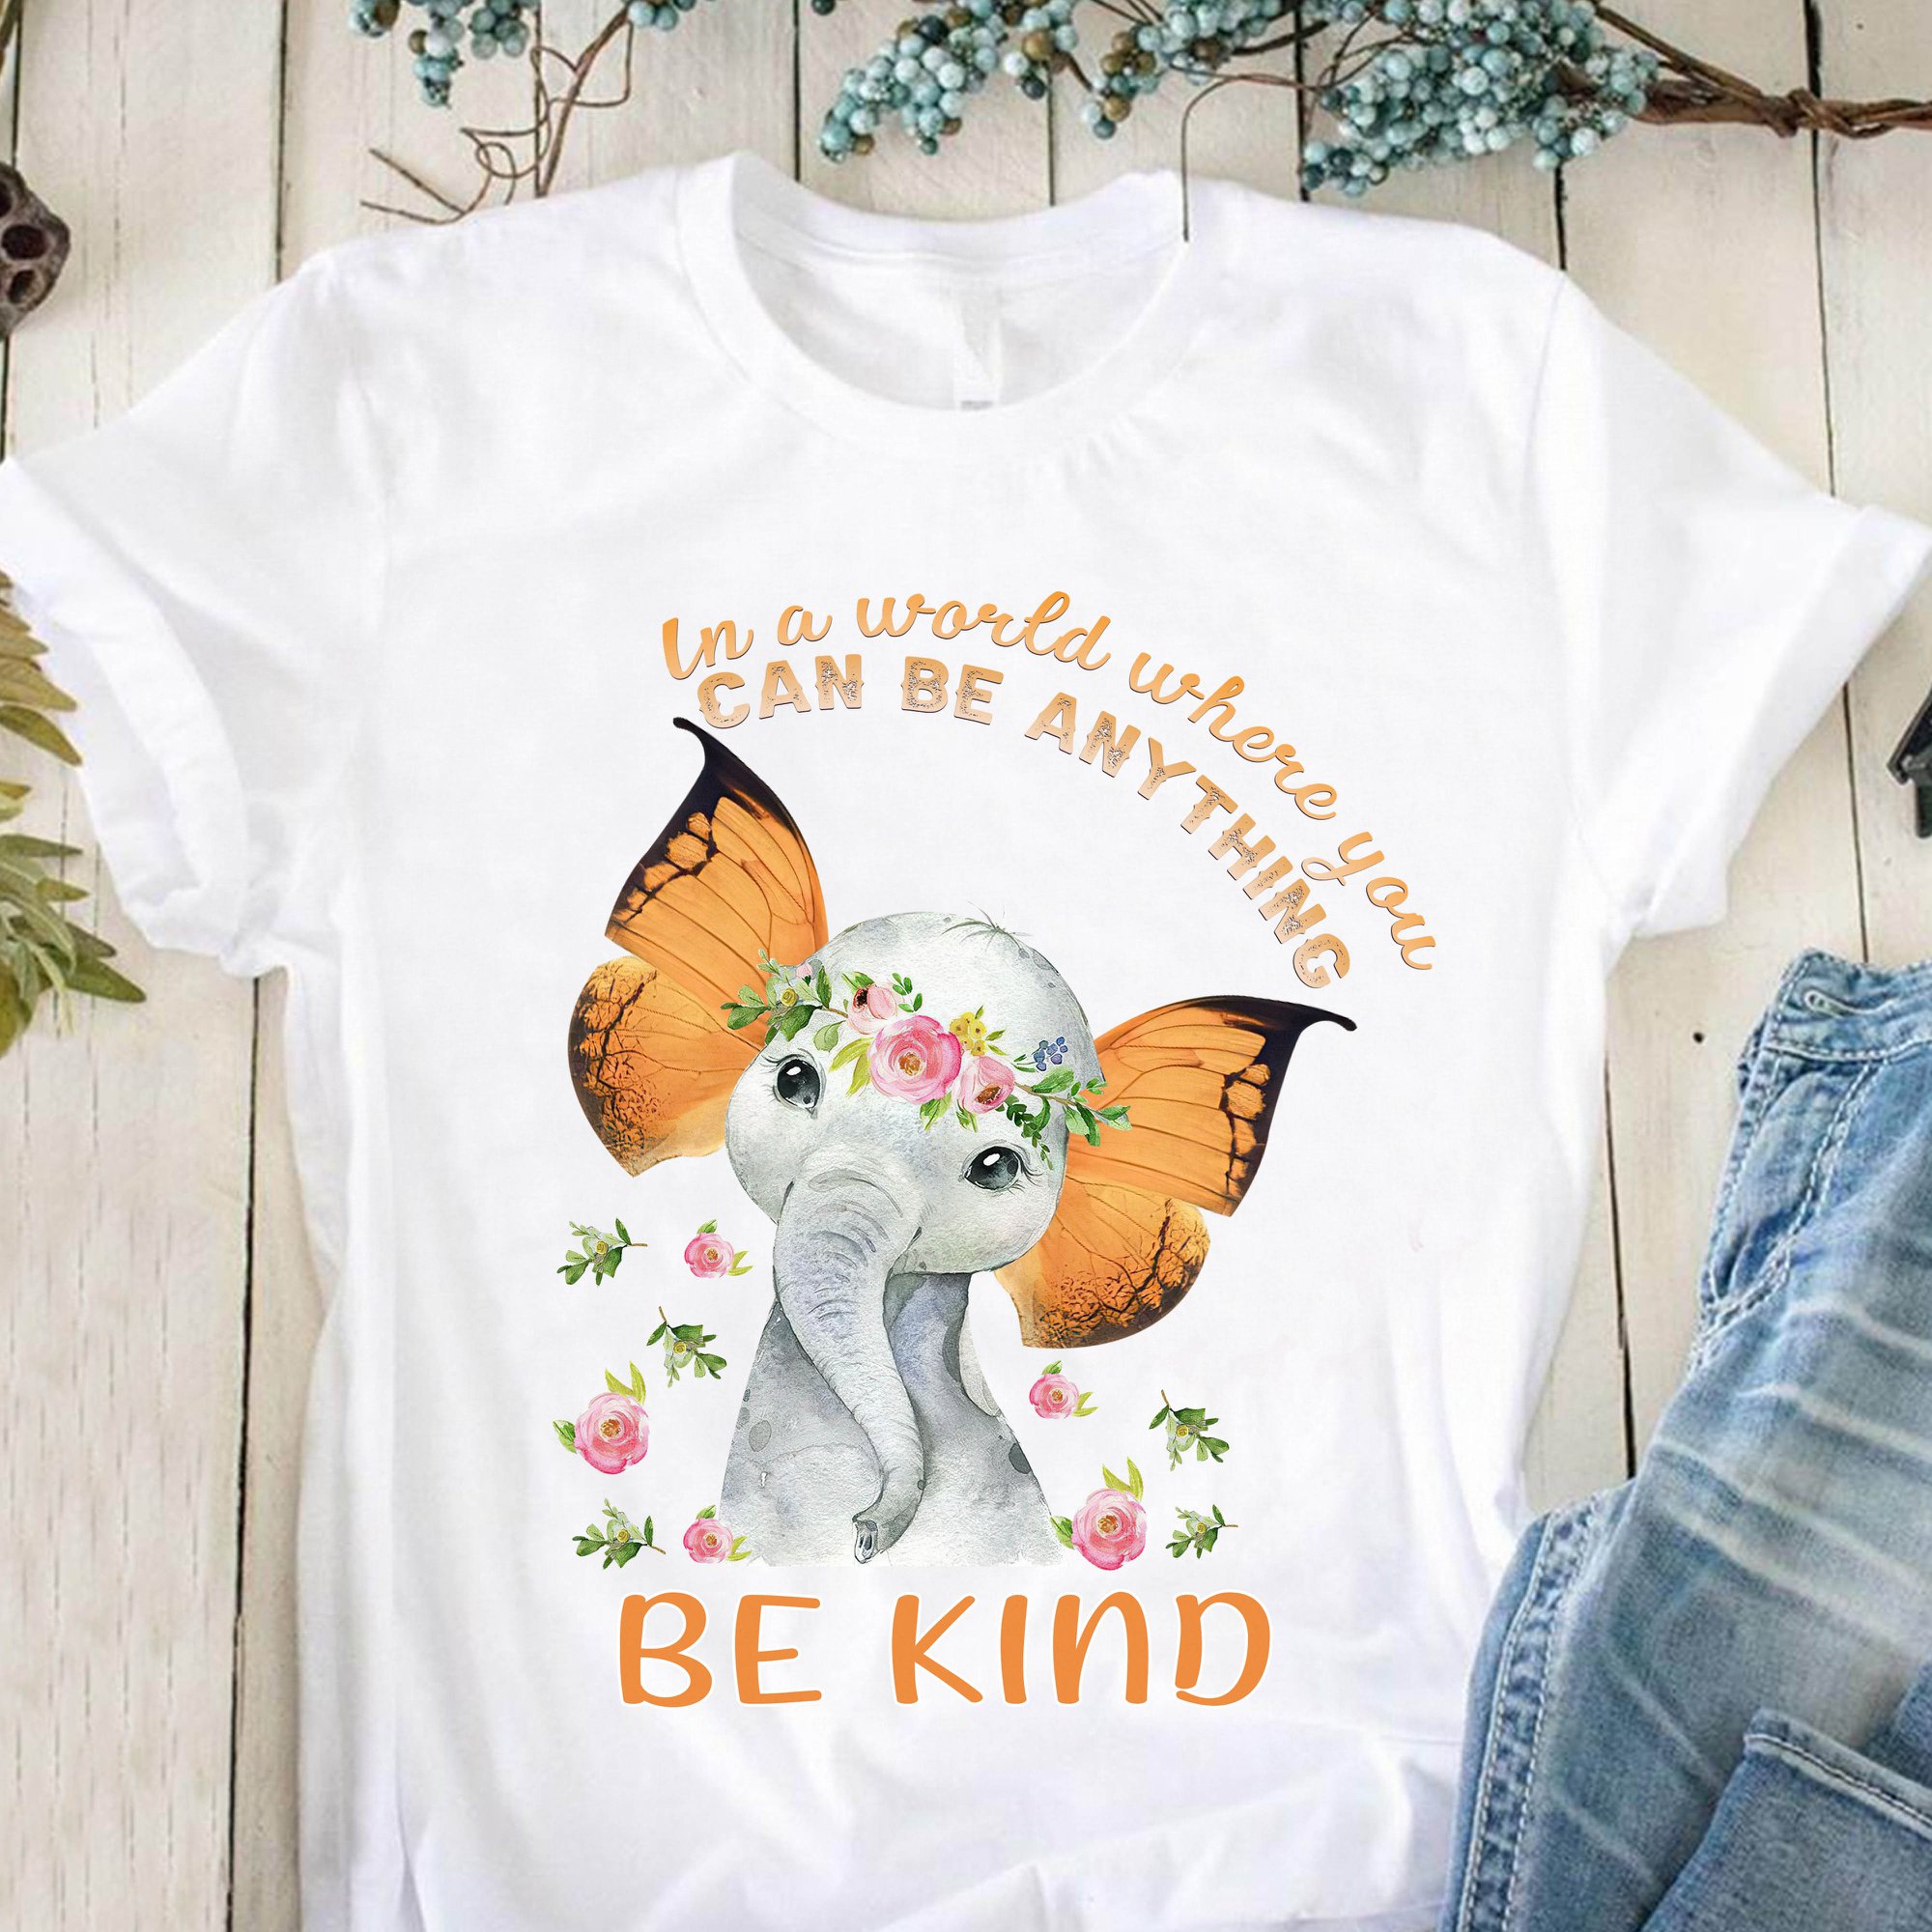 In a world where you can be anything be kind - Elephant with butterfly ears